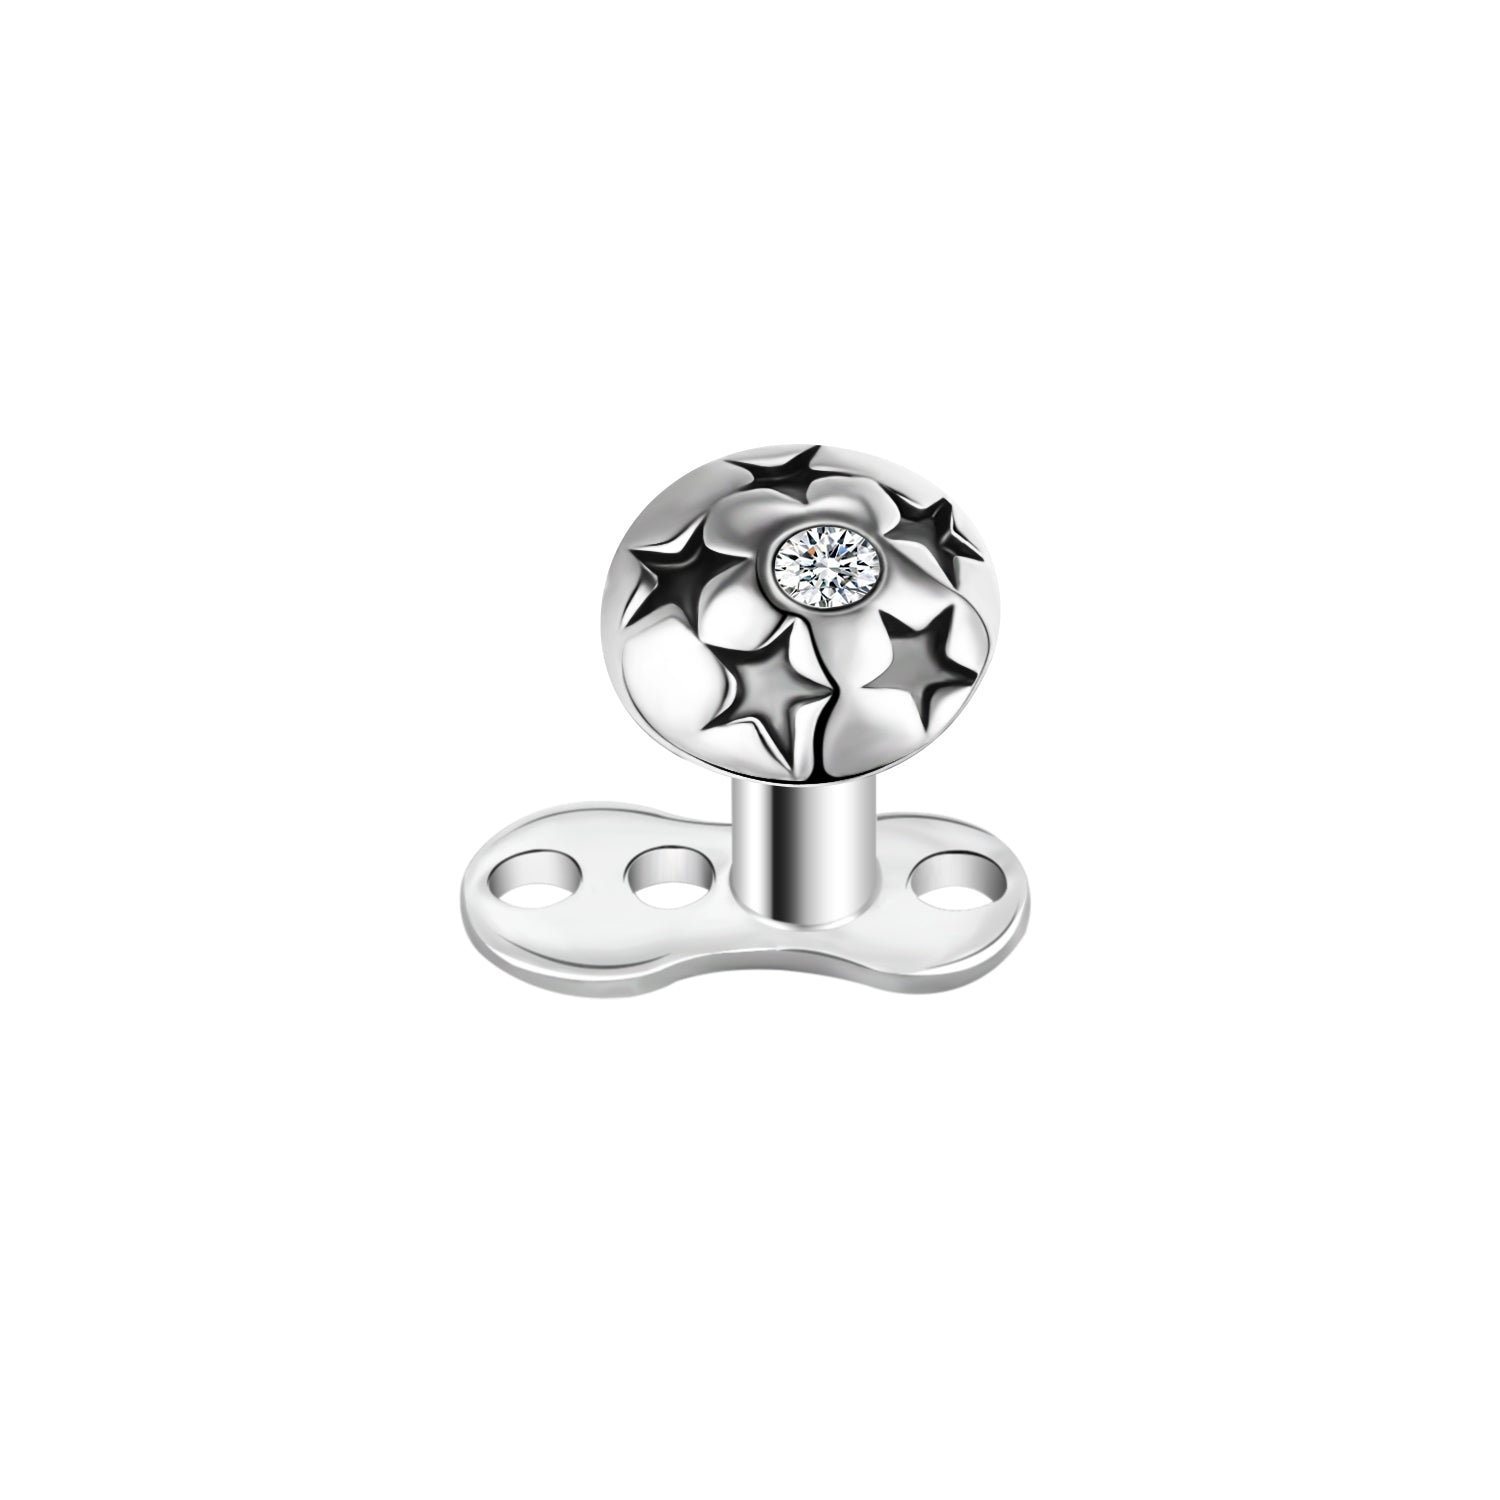 16G Zircon Dermal Anchor Tops and Base Surgical Steel Internally Threaded Skin Diver Piercings